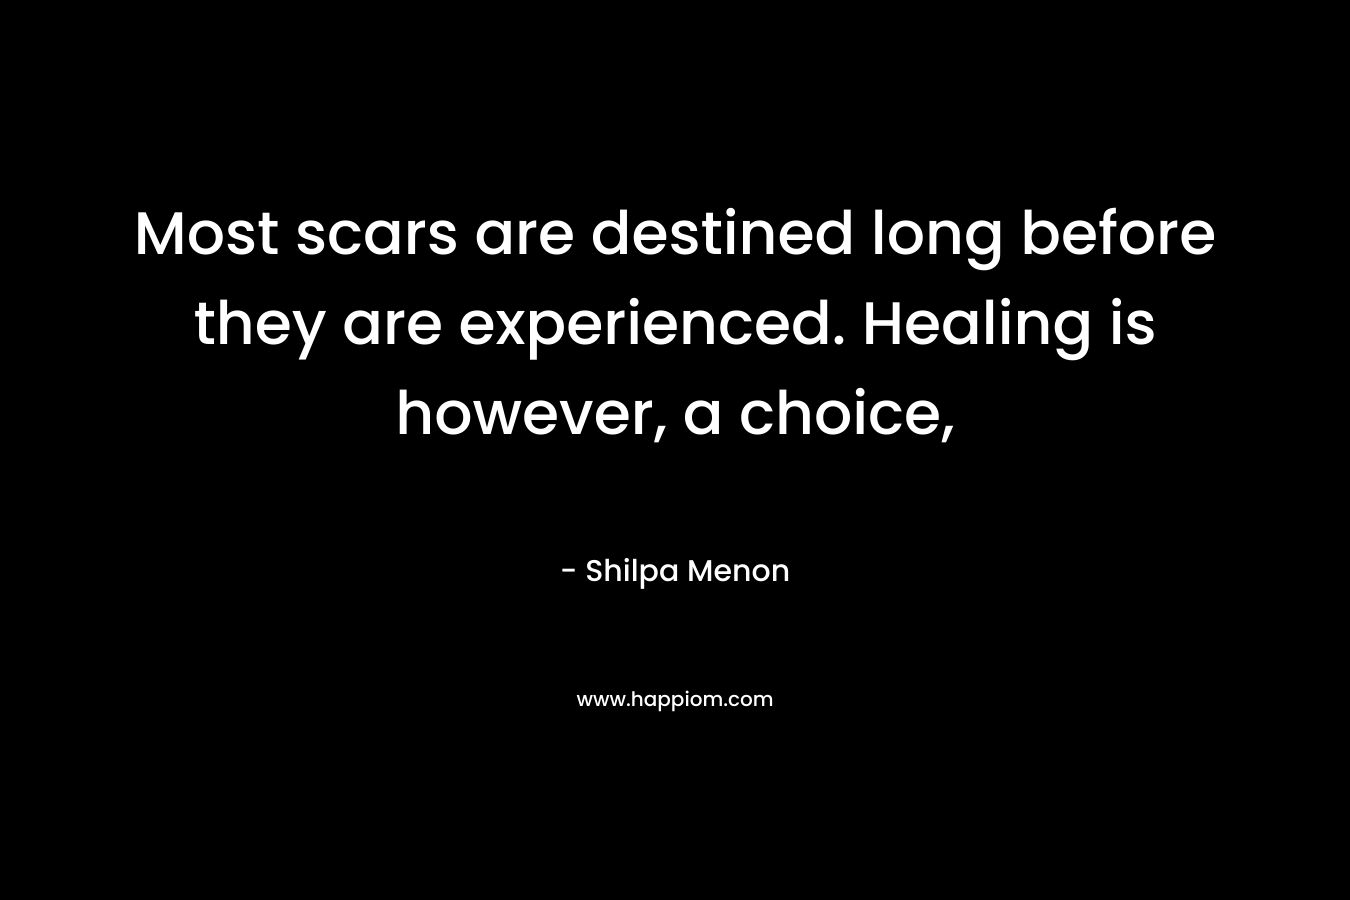 Most scars are destined long before they are experienced. Healing is however, a choice,